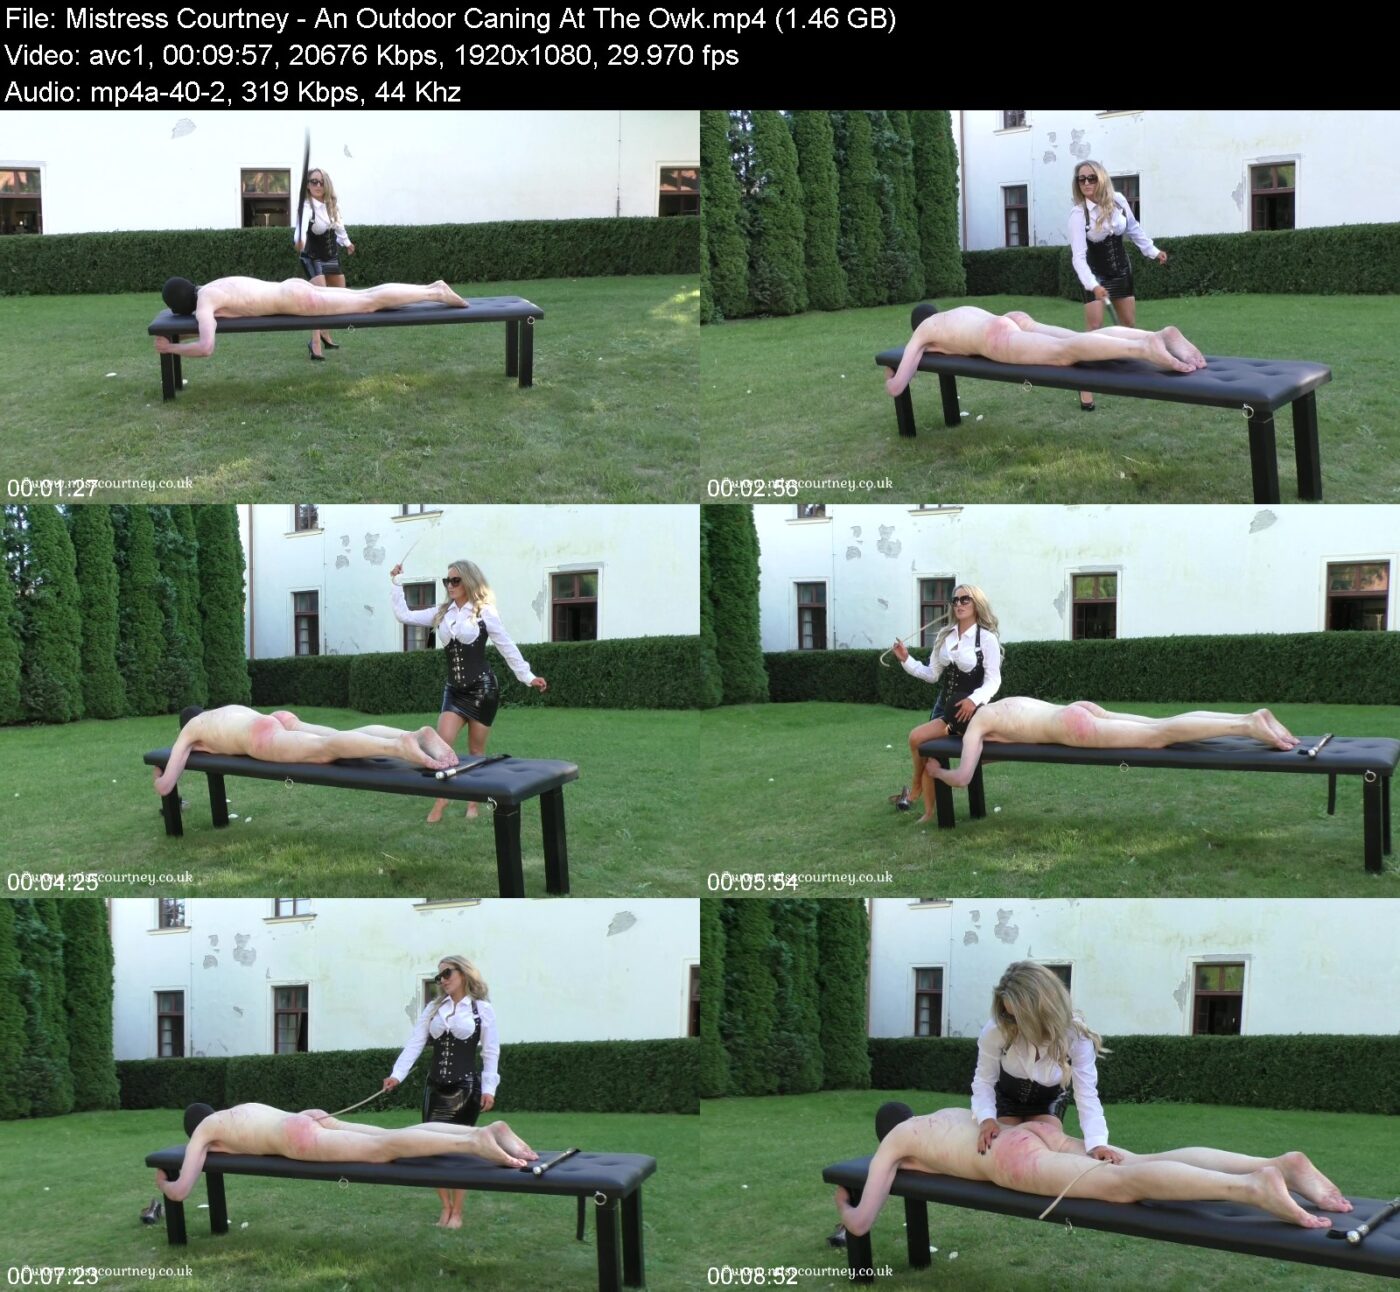 Mistress Courtney in An Outdoor Caning At The Owk